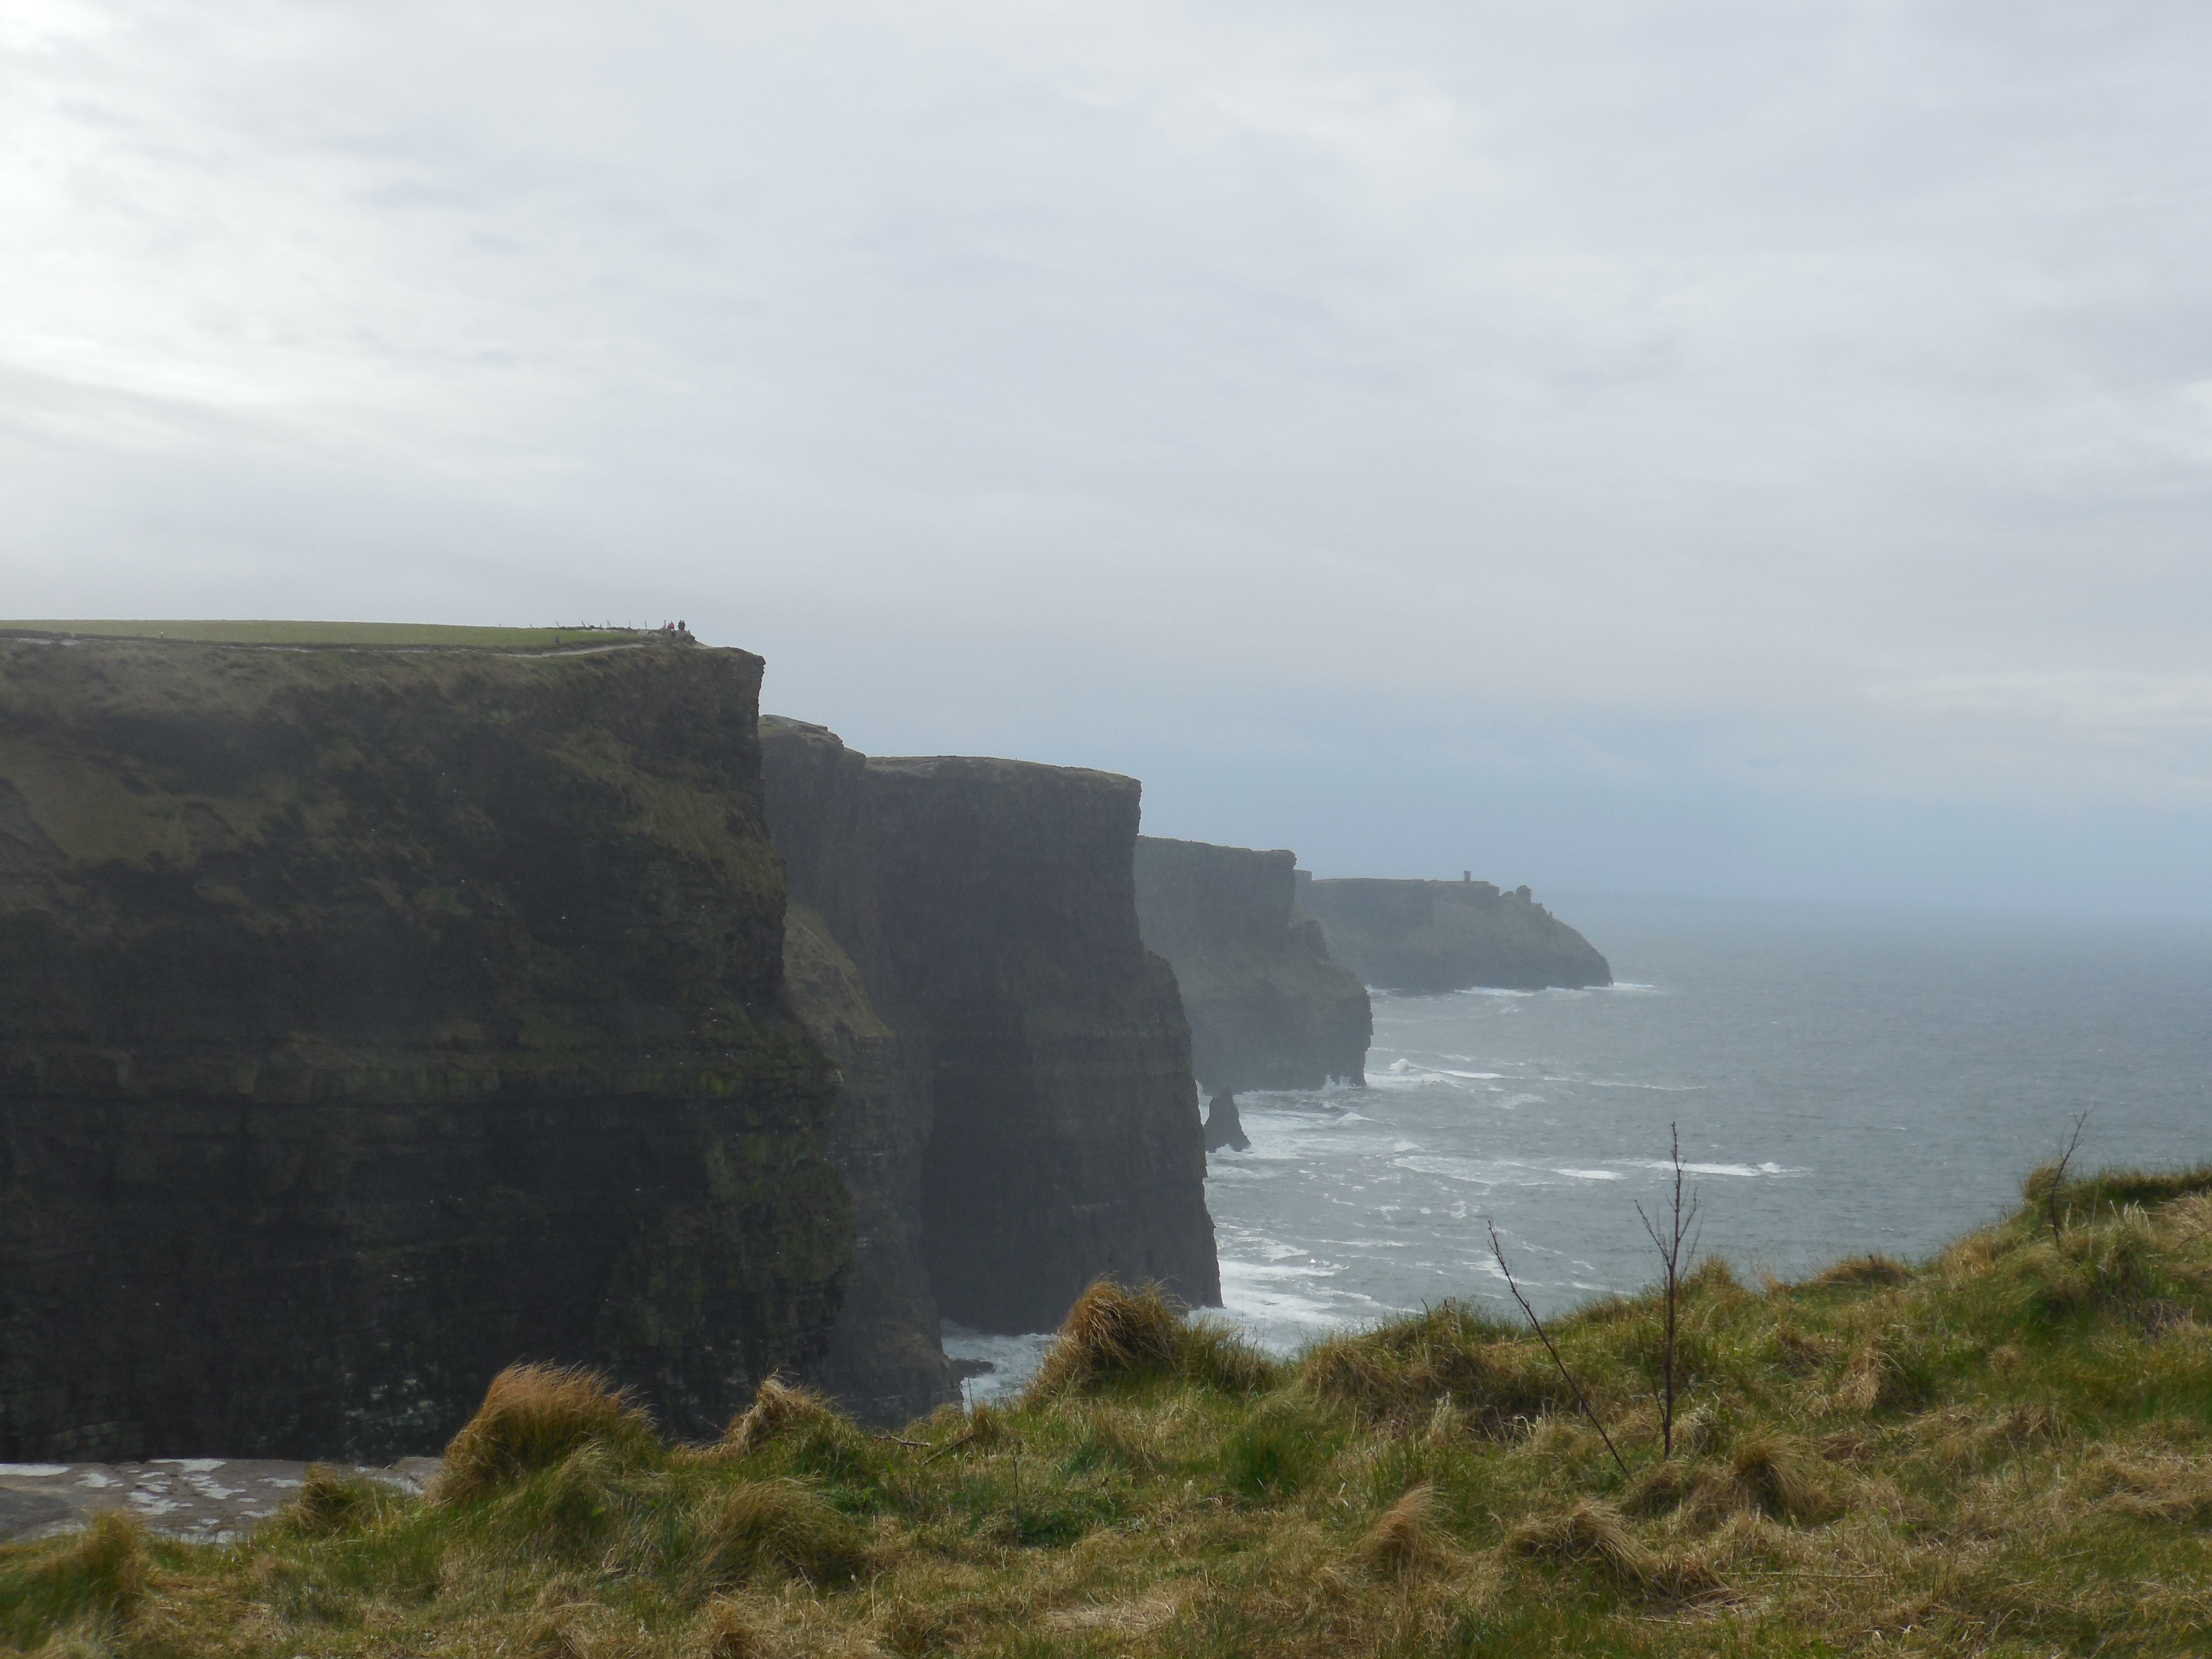 The Cliffs of Moher in Co. Clare.